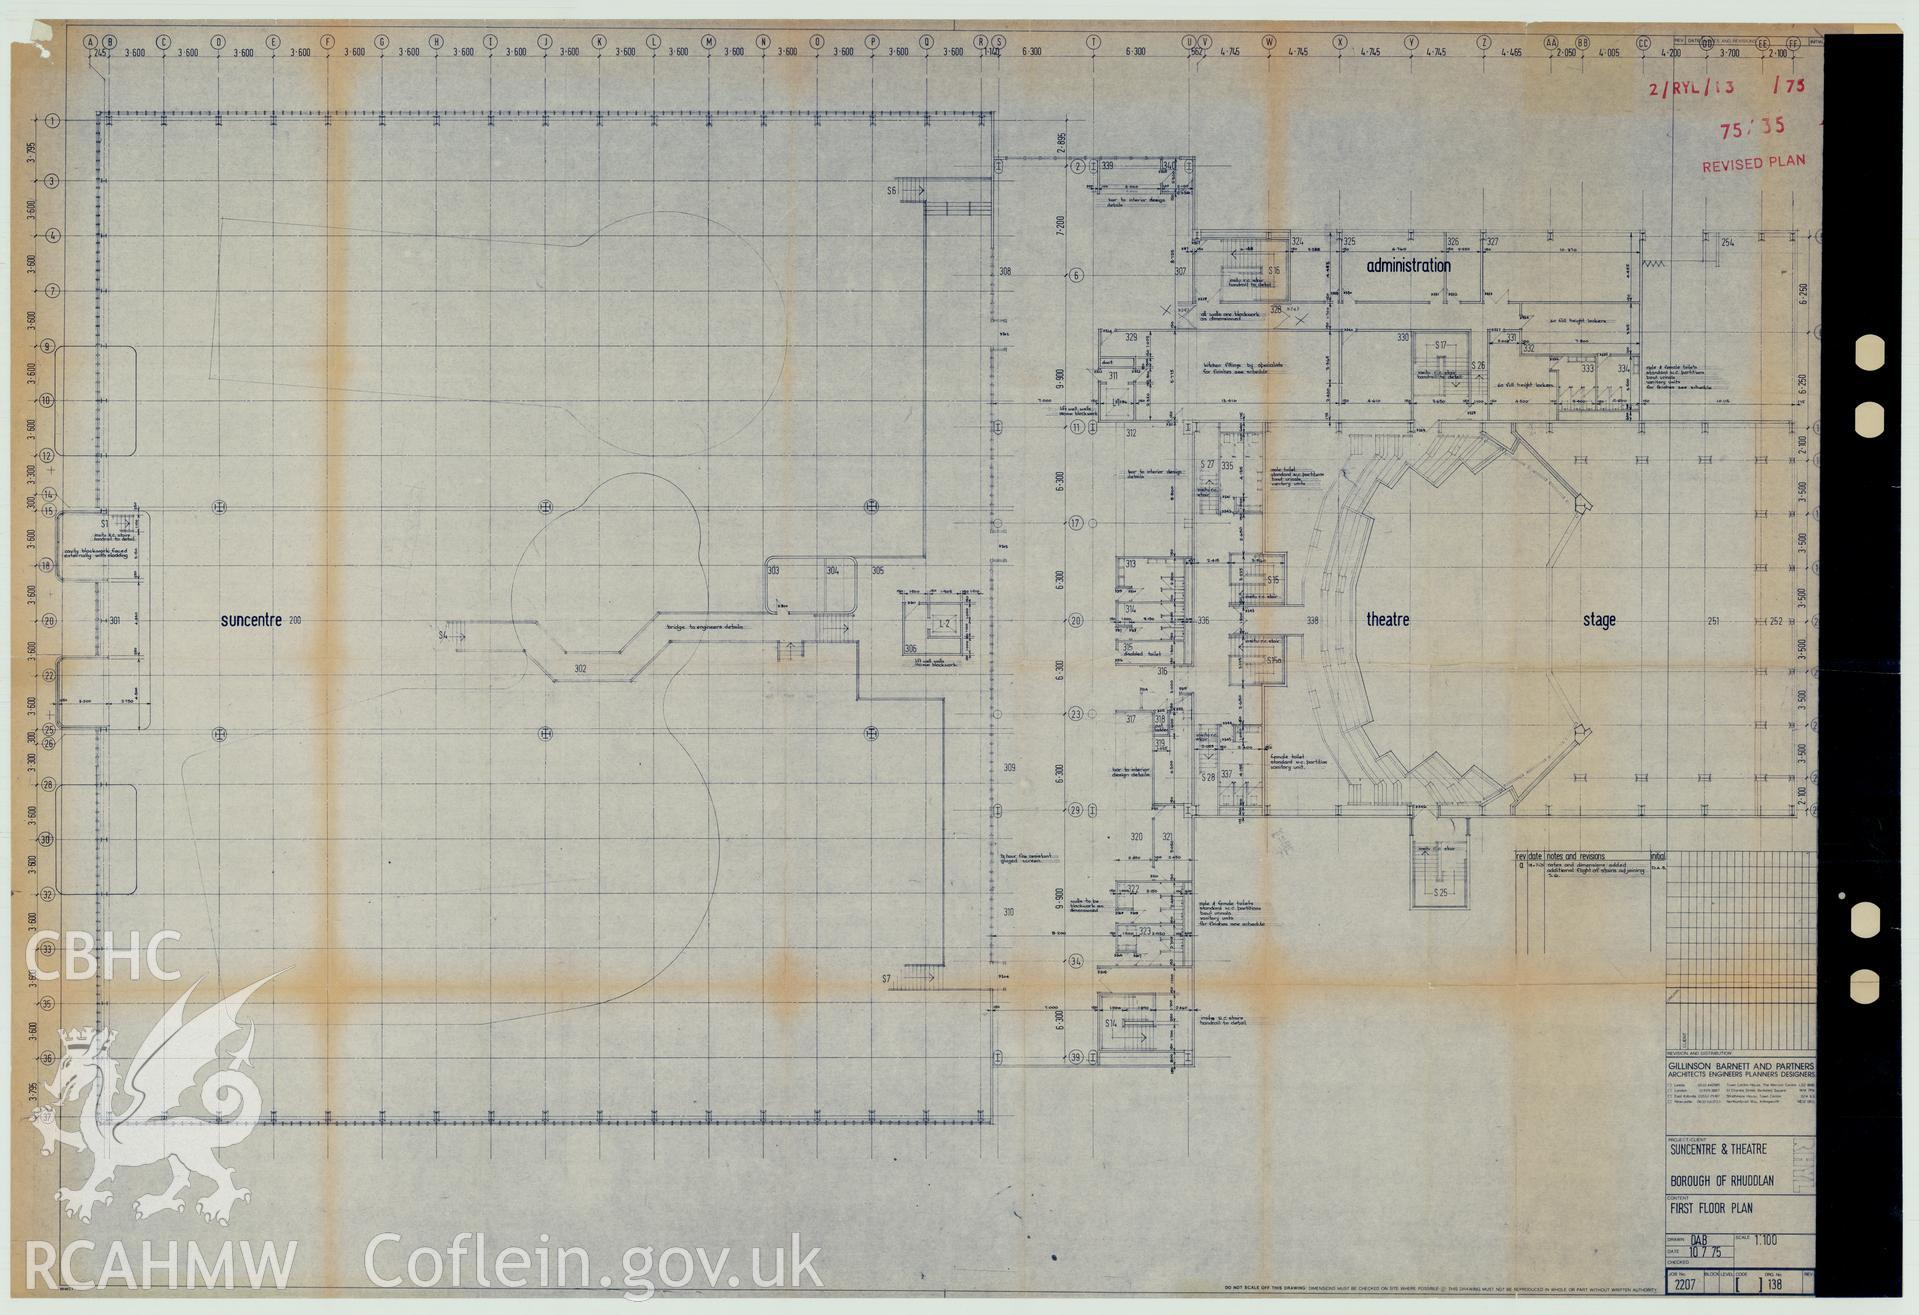 Digital copy of a measured drawing showing first floor plan of Rhyl Sun Centre and Theatre, produced by Gillinson Barnett & Partners  1975. Loaned for copying by Denbighshire County Council.